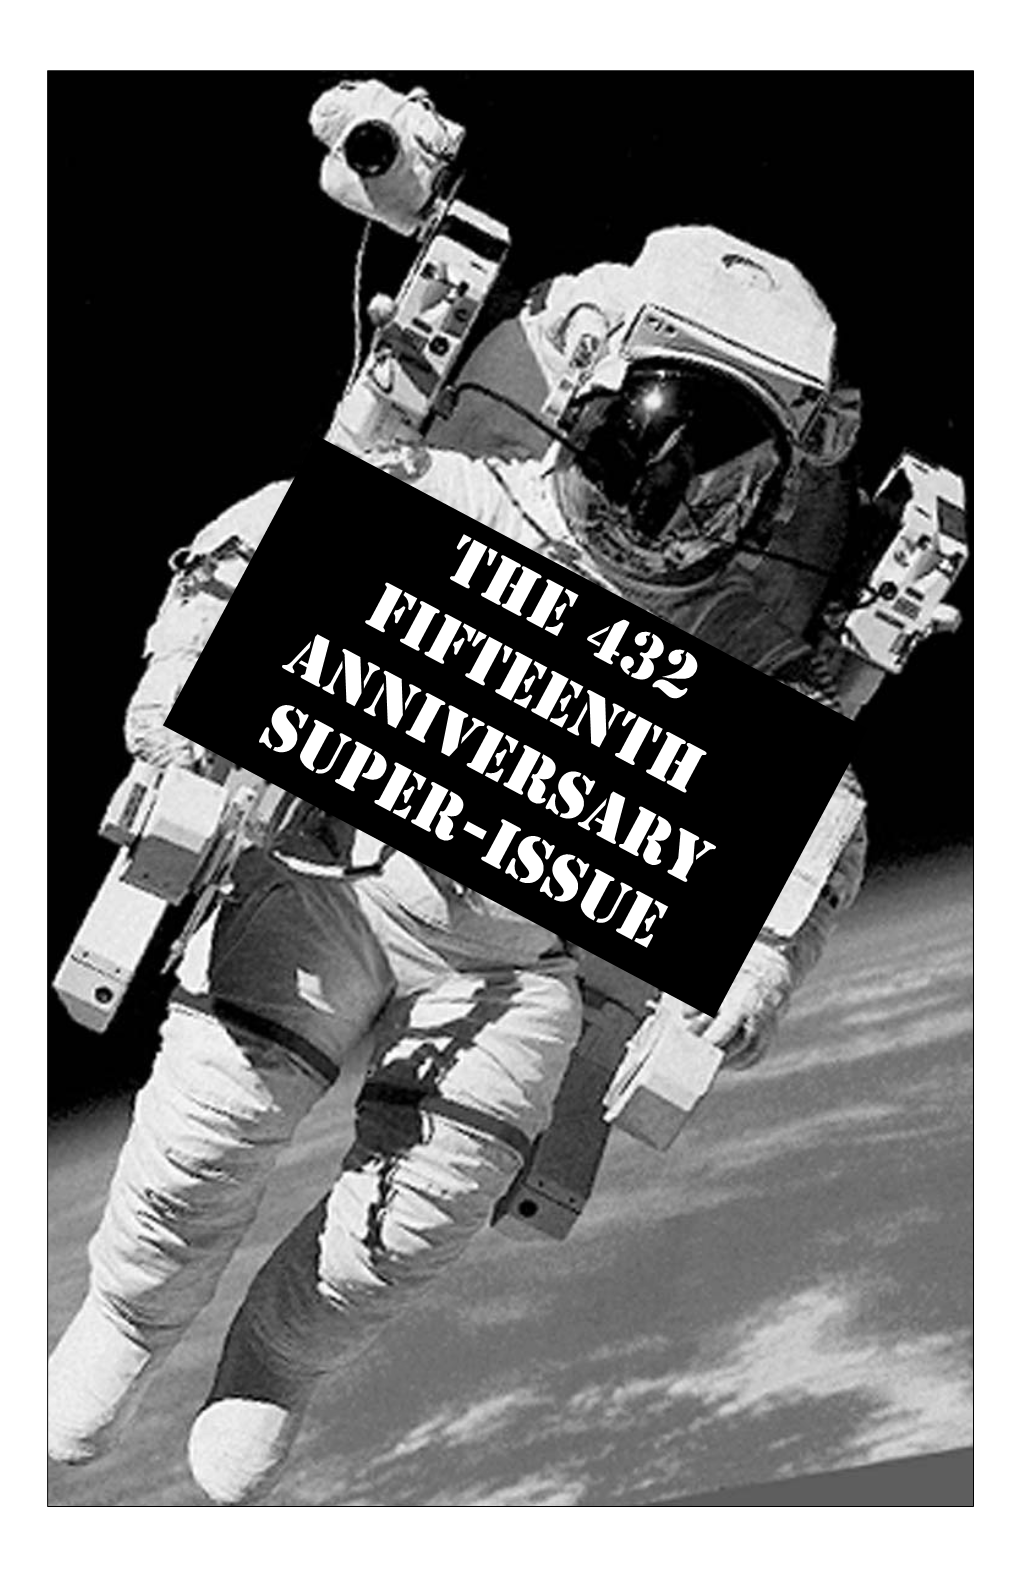 The 432 Fifteenth Anniversary Super-Issue VOLUME FIFTEEN ISSUE EIGHT 18 January 2002